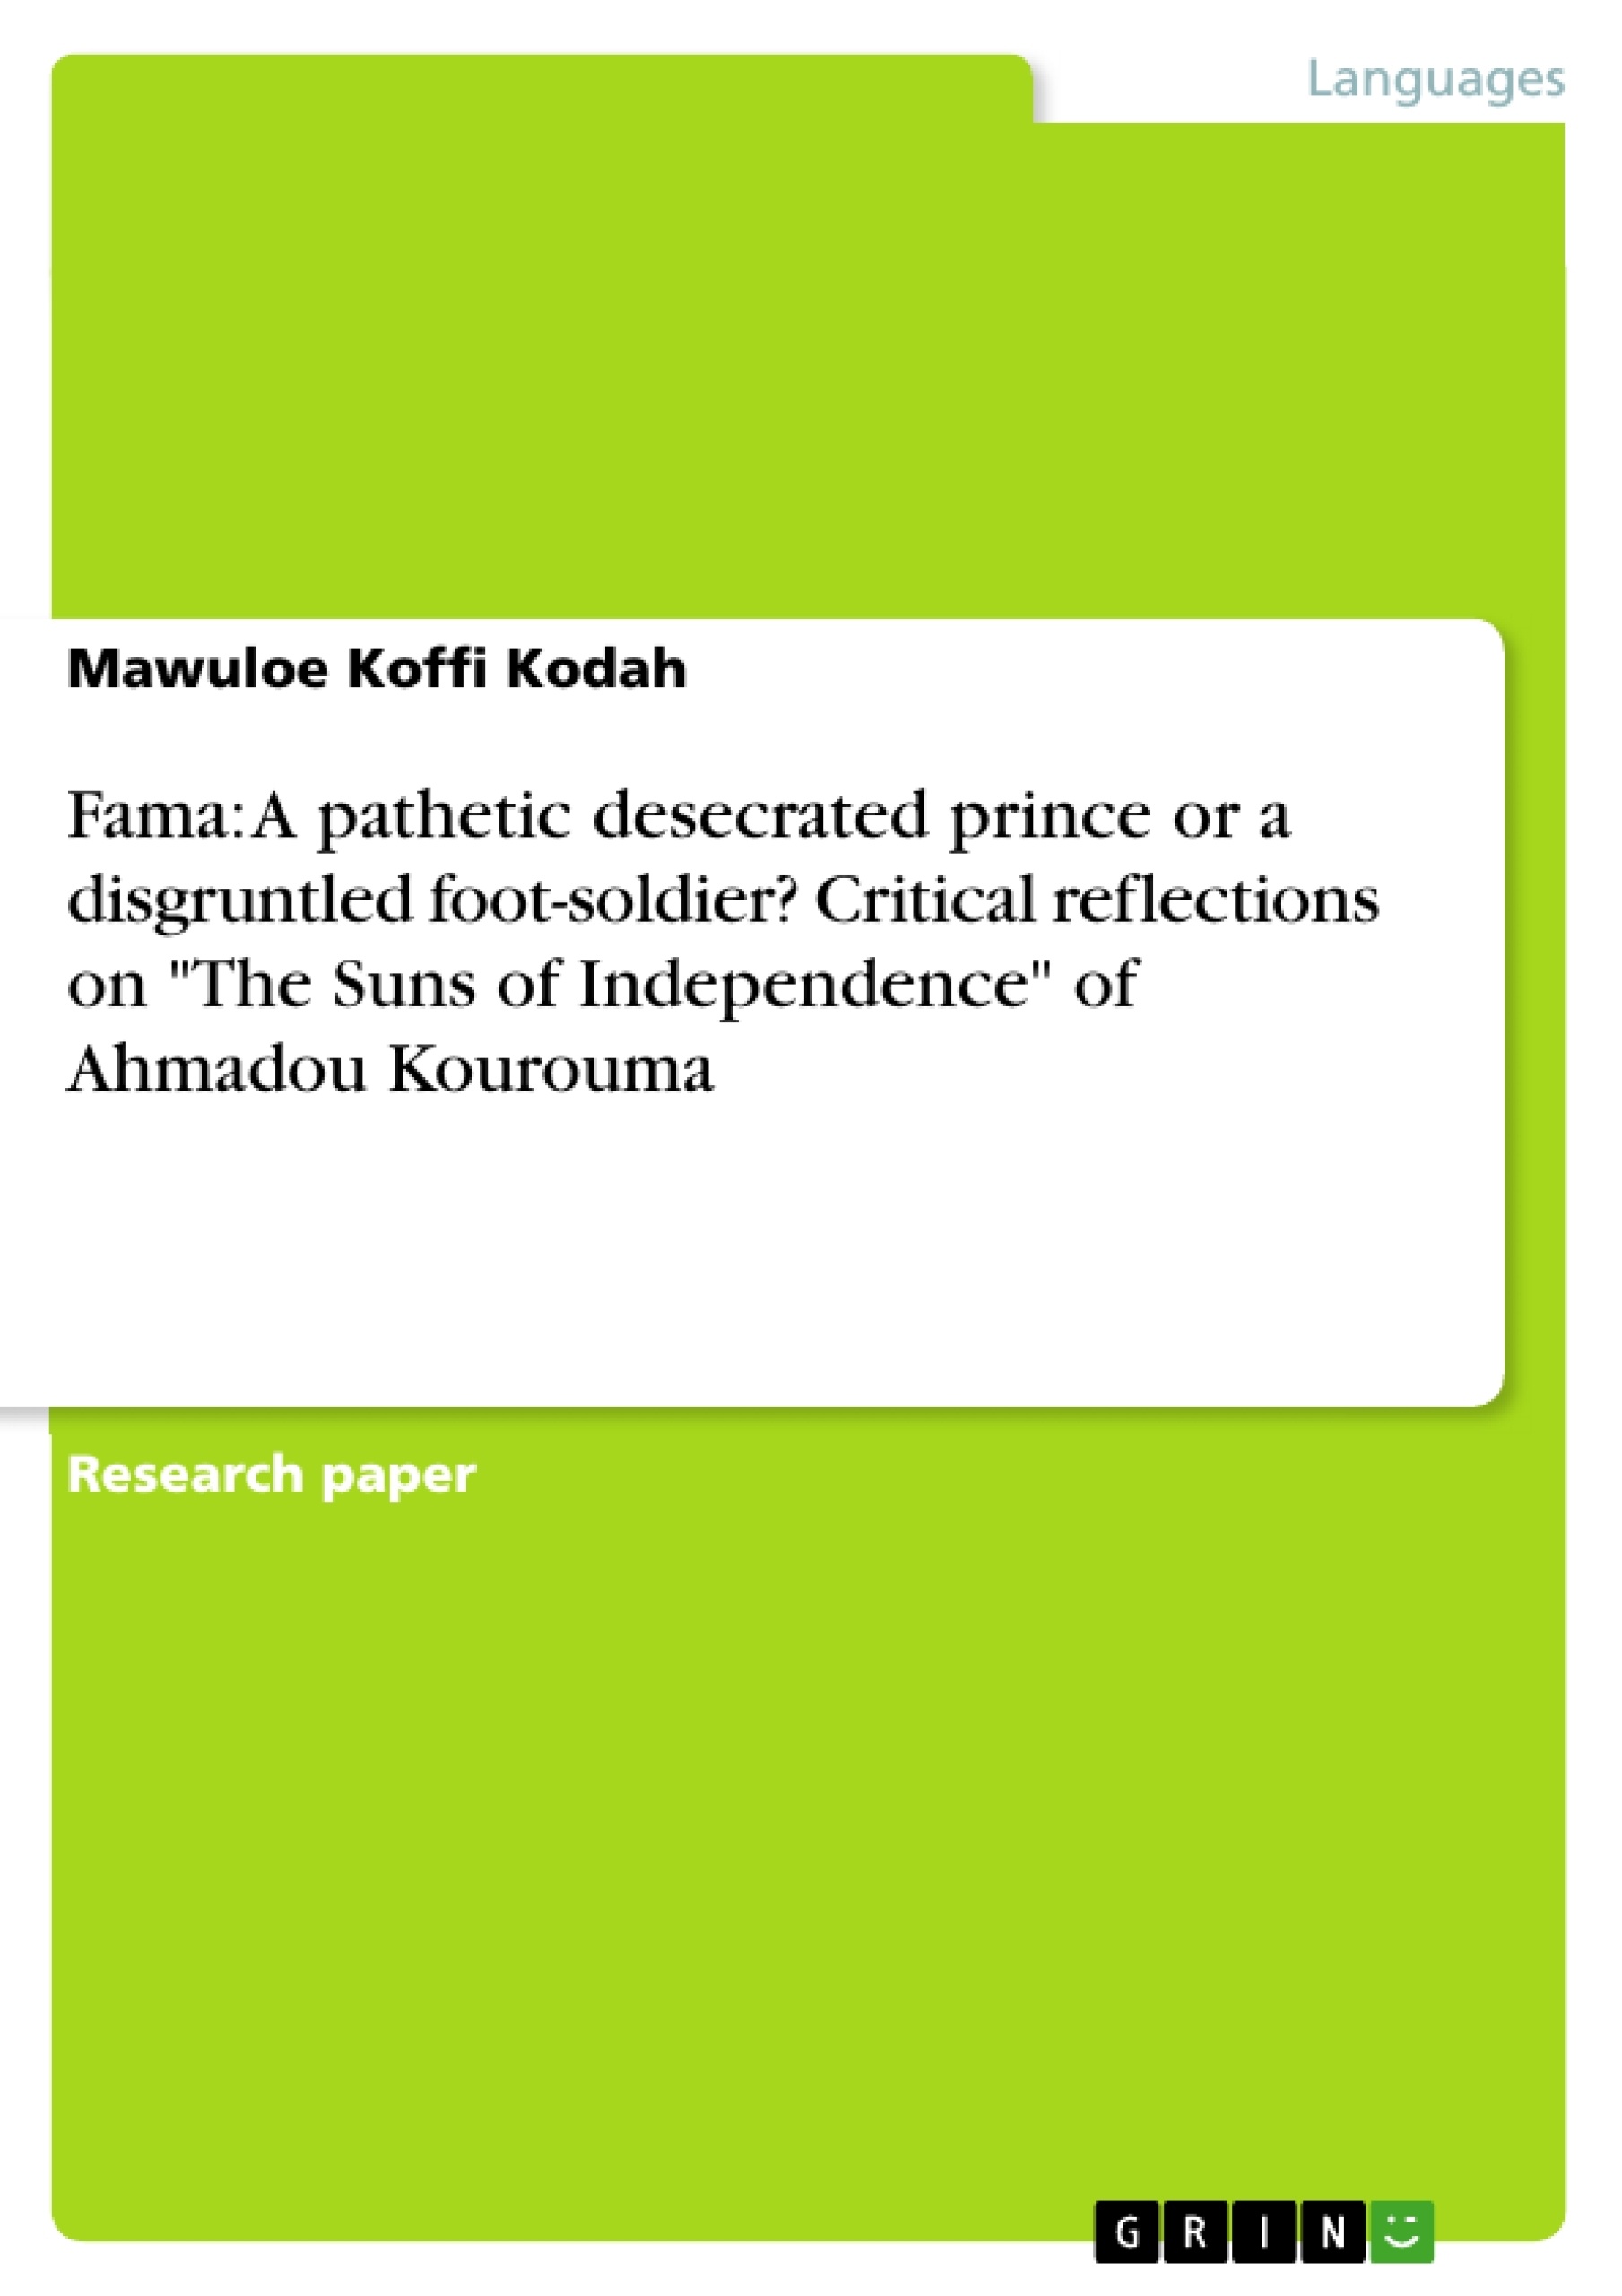 Title: Fama: A pathetic desecrated prince or a disgruntled foot-soldier? Critical reflections on "The Suns of Independence" of Ahmadou Kourouma